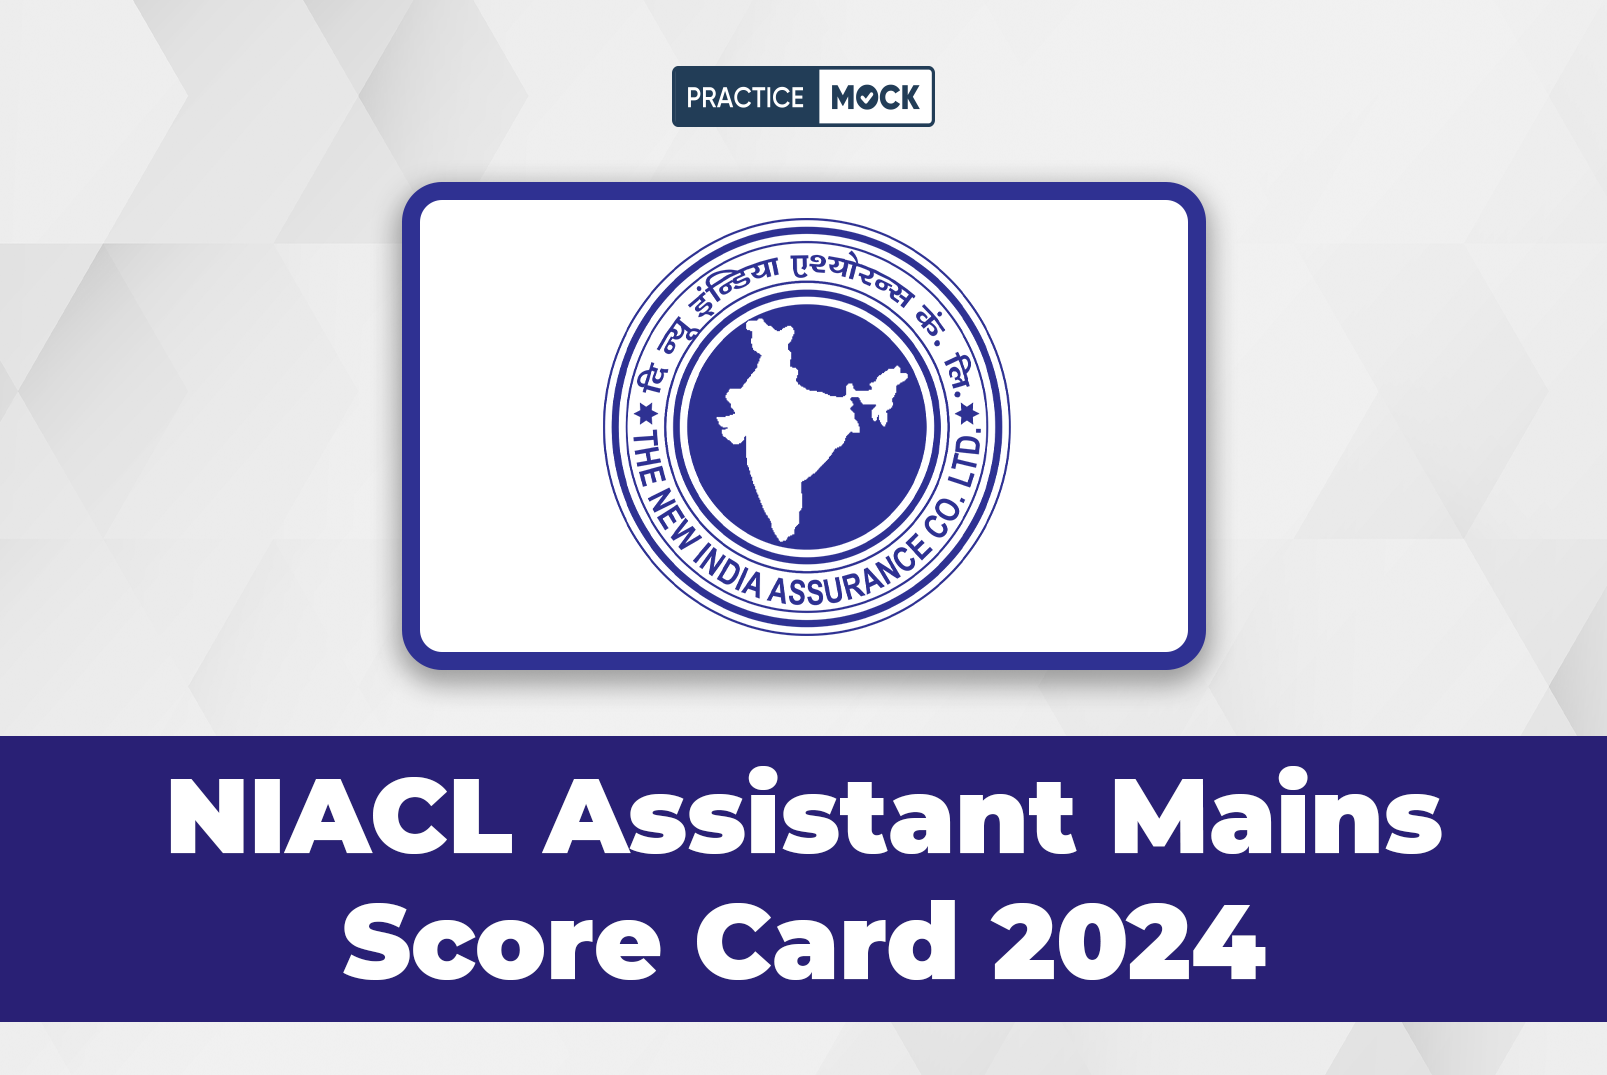 NIACL Assistant Mains Score Card 2024